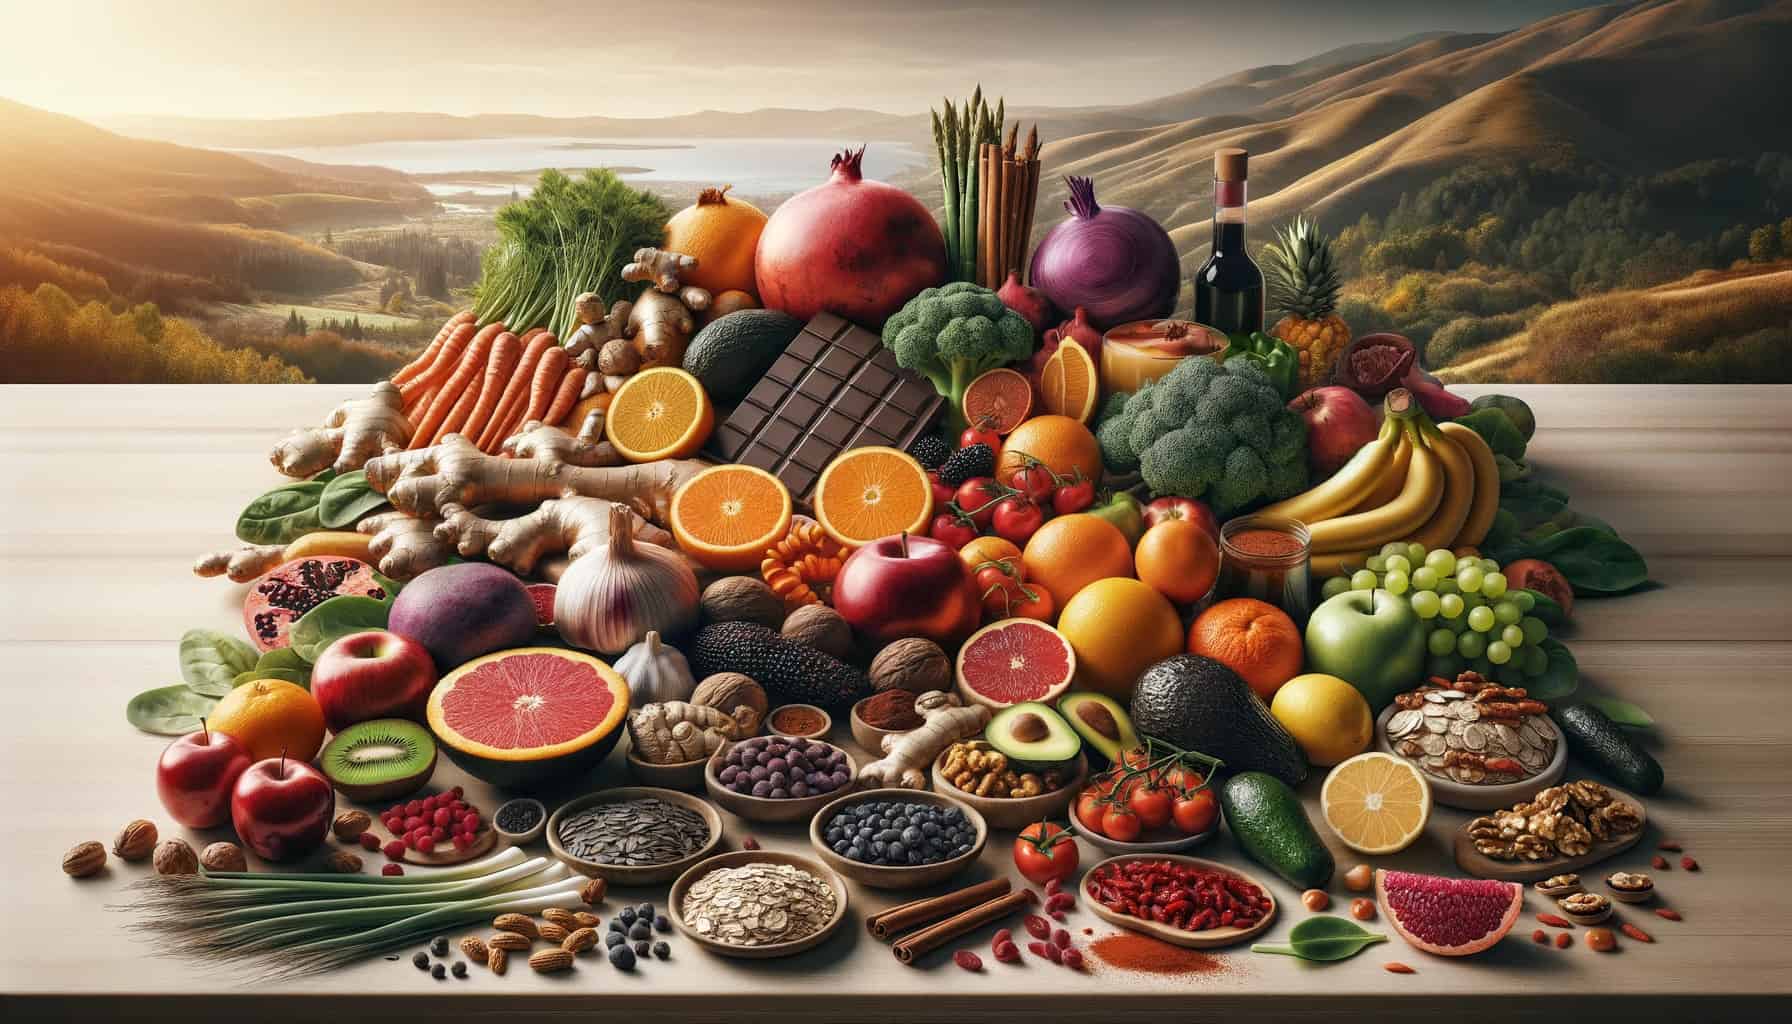 Diverse array of healthy foods: oranges, dark chocolate, cayenne pepper, sunflower seeds, root ginger, garlic, ginkgo biloba, beet, turmeric, salmon, avocados, pomegranate, berries, red grapes, spinach, cinnamon, bananas, watermelon, onions, kiwi, oats, apples, goji berries, cherries, walnuts, tomatoes, carrots, green tea, citrus fruits, papaya, rosemary, and asparagus.